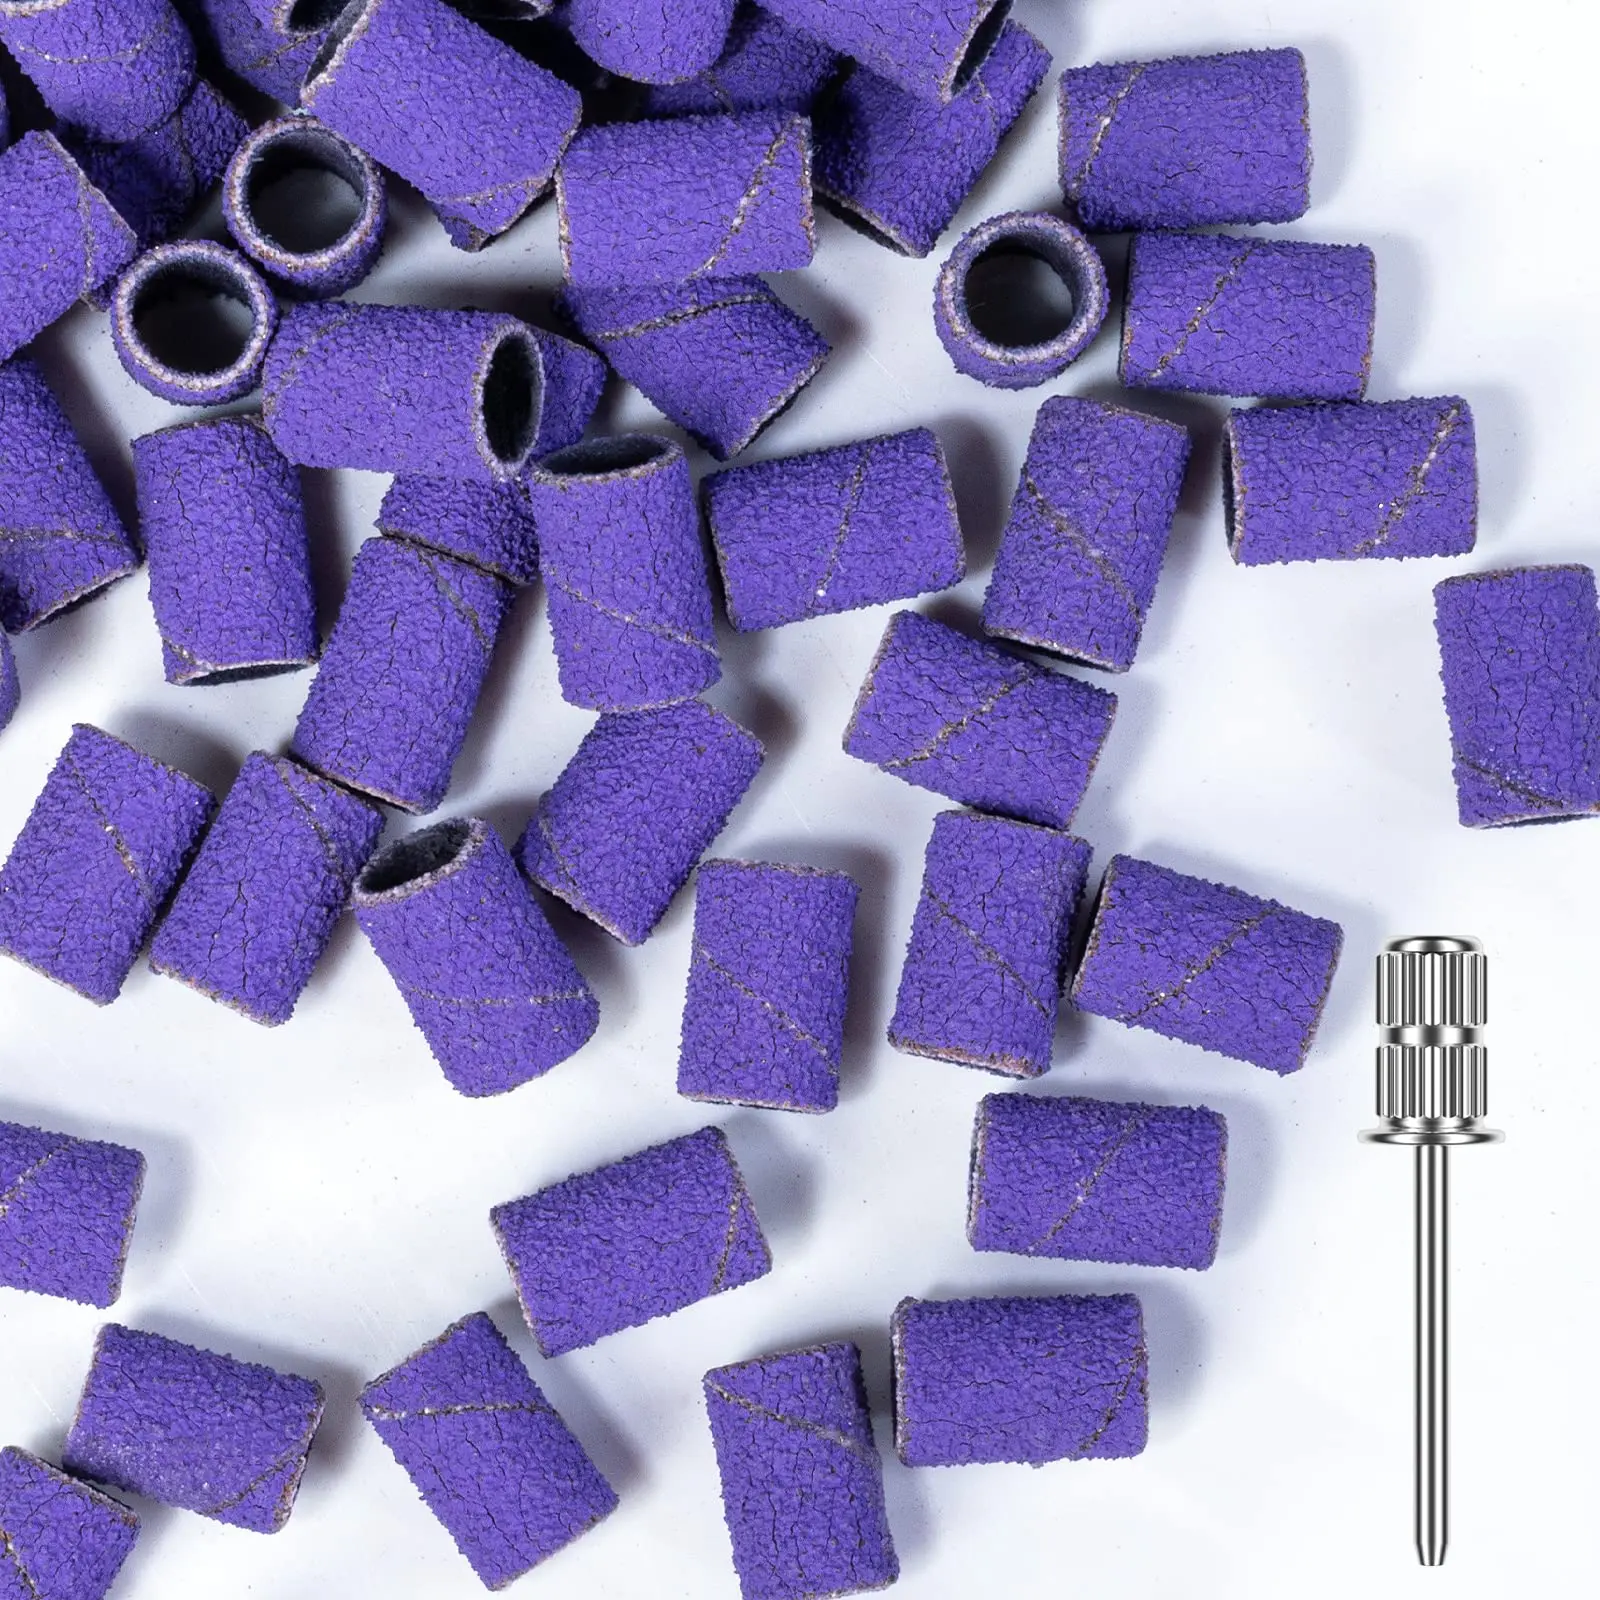 

50PCS Coarse Grit Nail File Sanding Bands Set with Mandrel Bit for Acrylic Nails Gel Manicures and Pedicure Purple